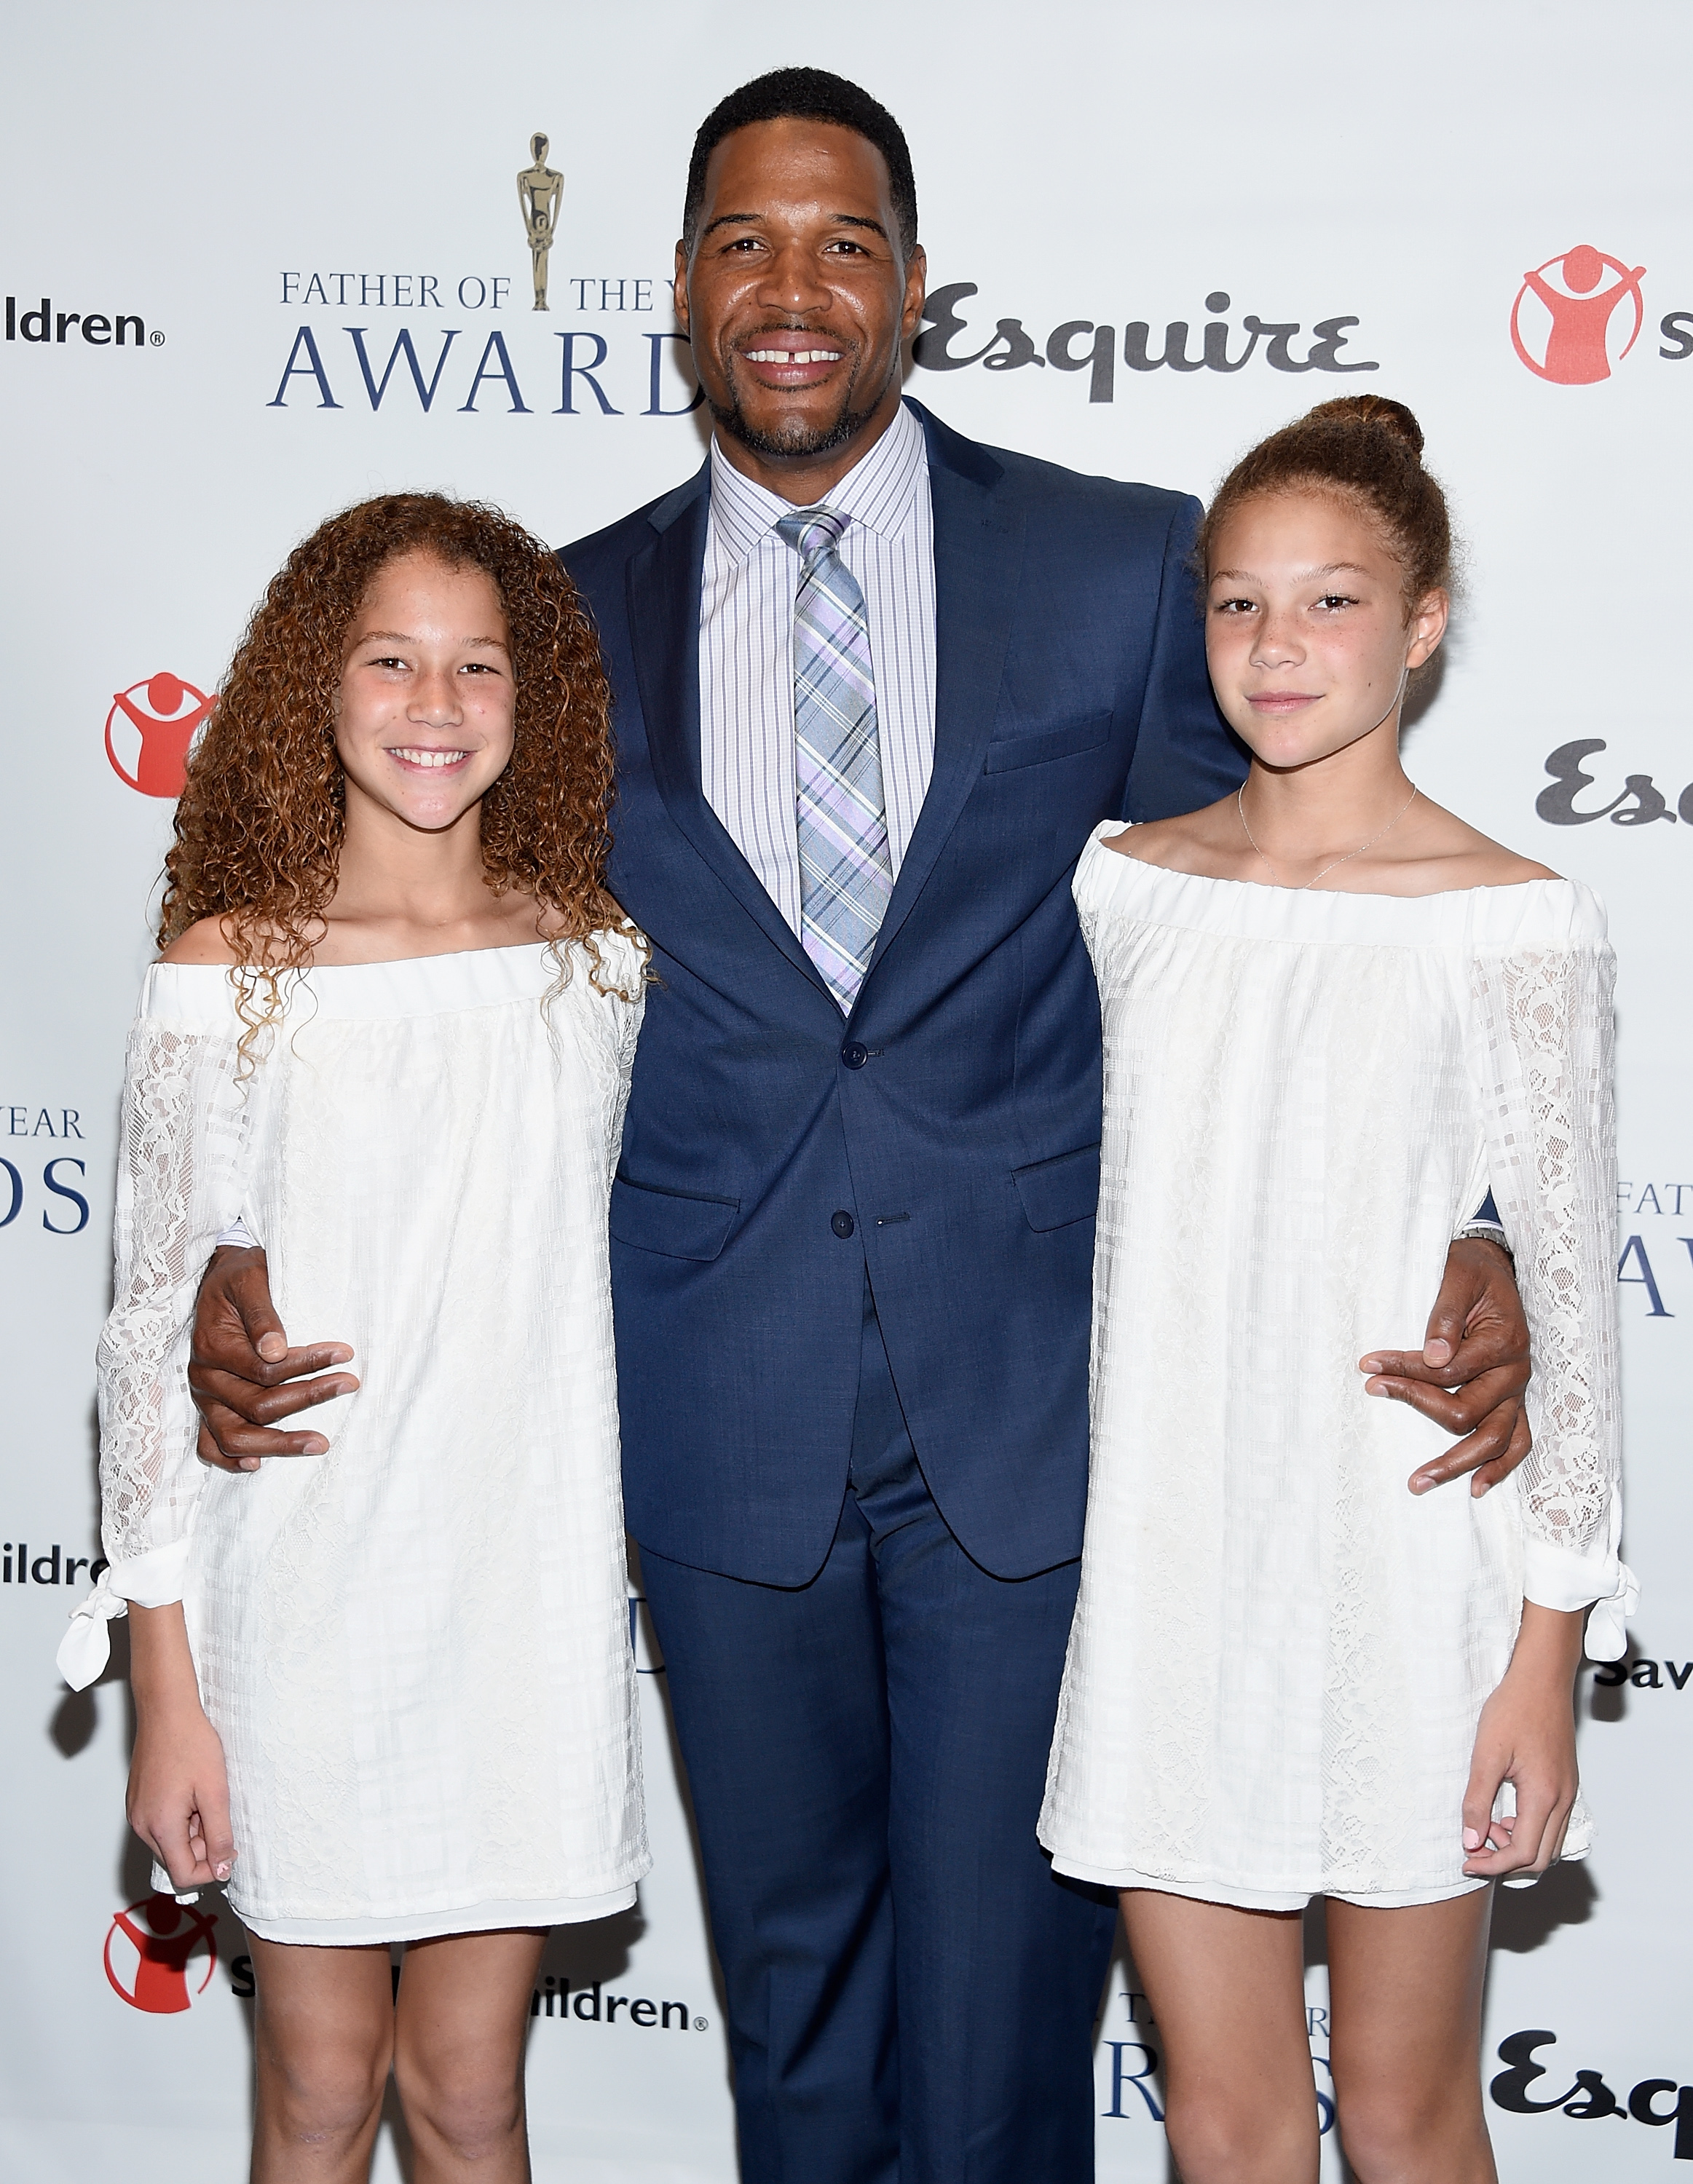 Michael Strahan and his daughters Isabella and Sophia Strahan at The 76th Annual Father of The Year Awards on June 15, 2017, in New York City | Source: Getty Images